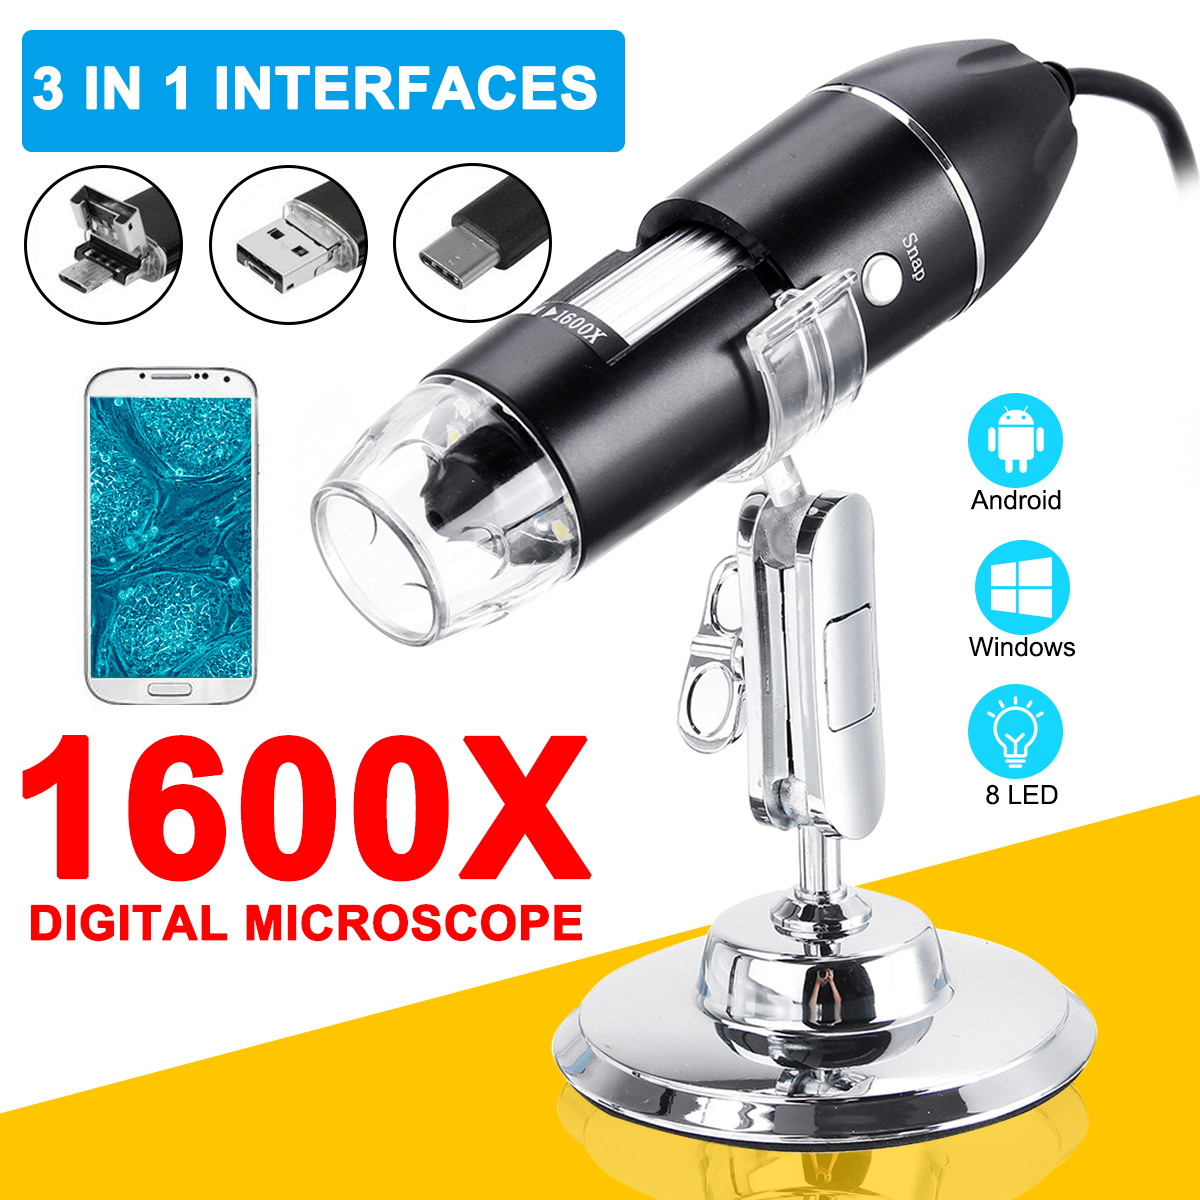 1600X 8LED USB Digital Microscope Endoscope Zoom Camera Magnifier With Stand 